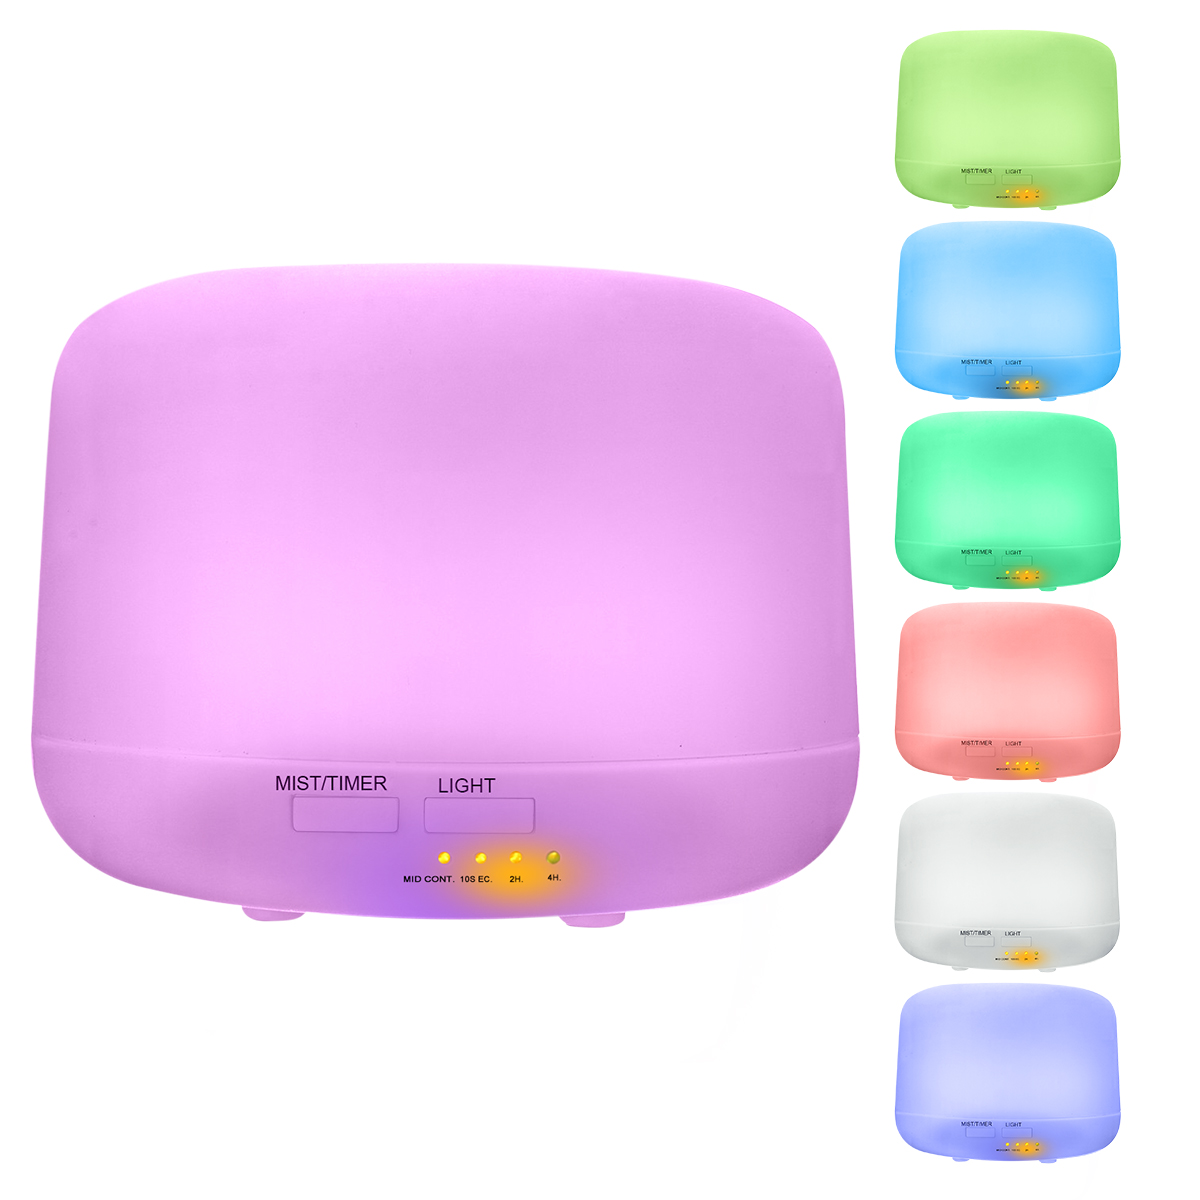 ELEGIANT-300ml-Air-Humidifier-Purifier-Ultrasonic-Essential-Oil-Diffuser-Cool-Mist-7-Color-LED-Light-1379720-6